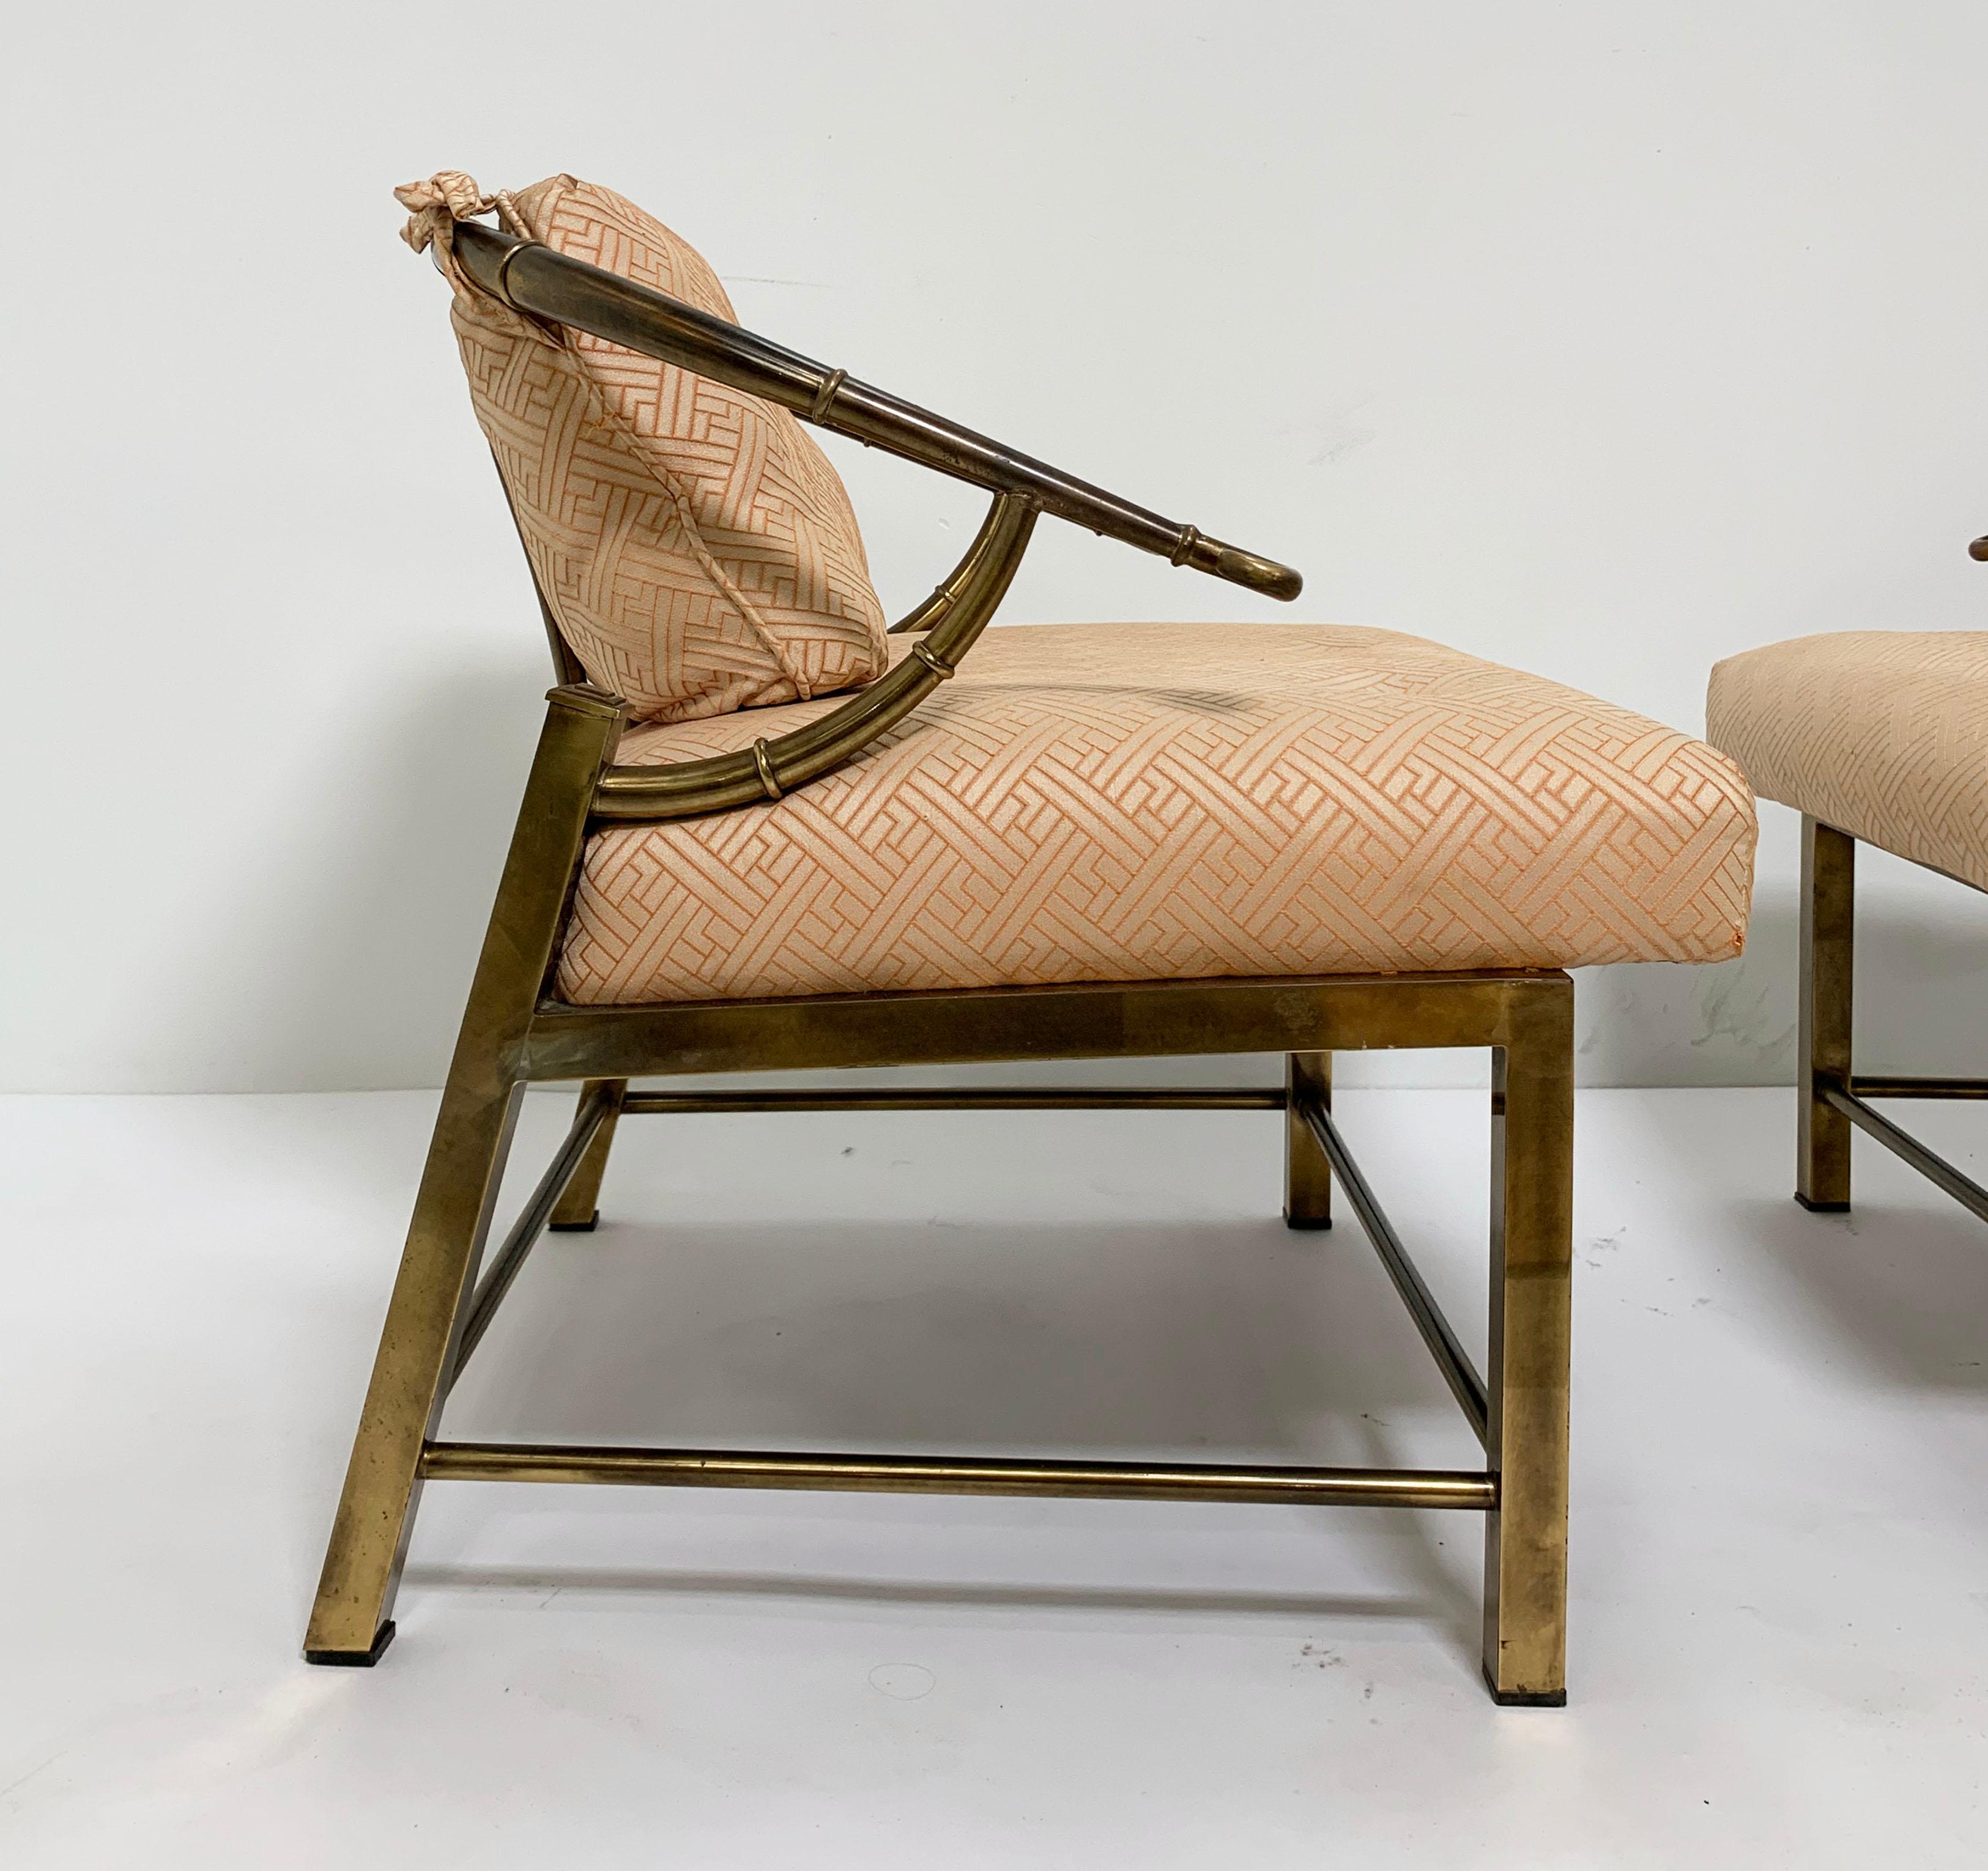 Brass Pair of Mastercraft Hollywood Regency Lounge Chairs by Pengelly, circa 1960s